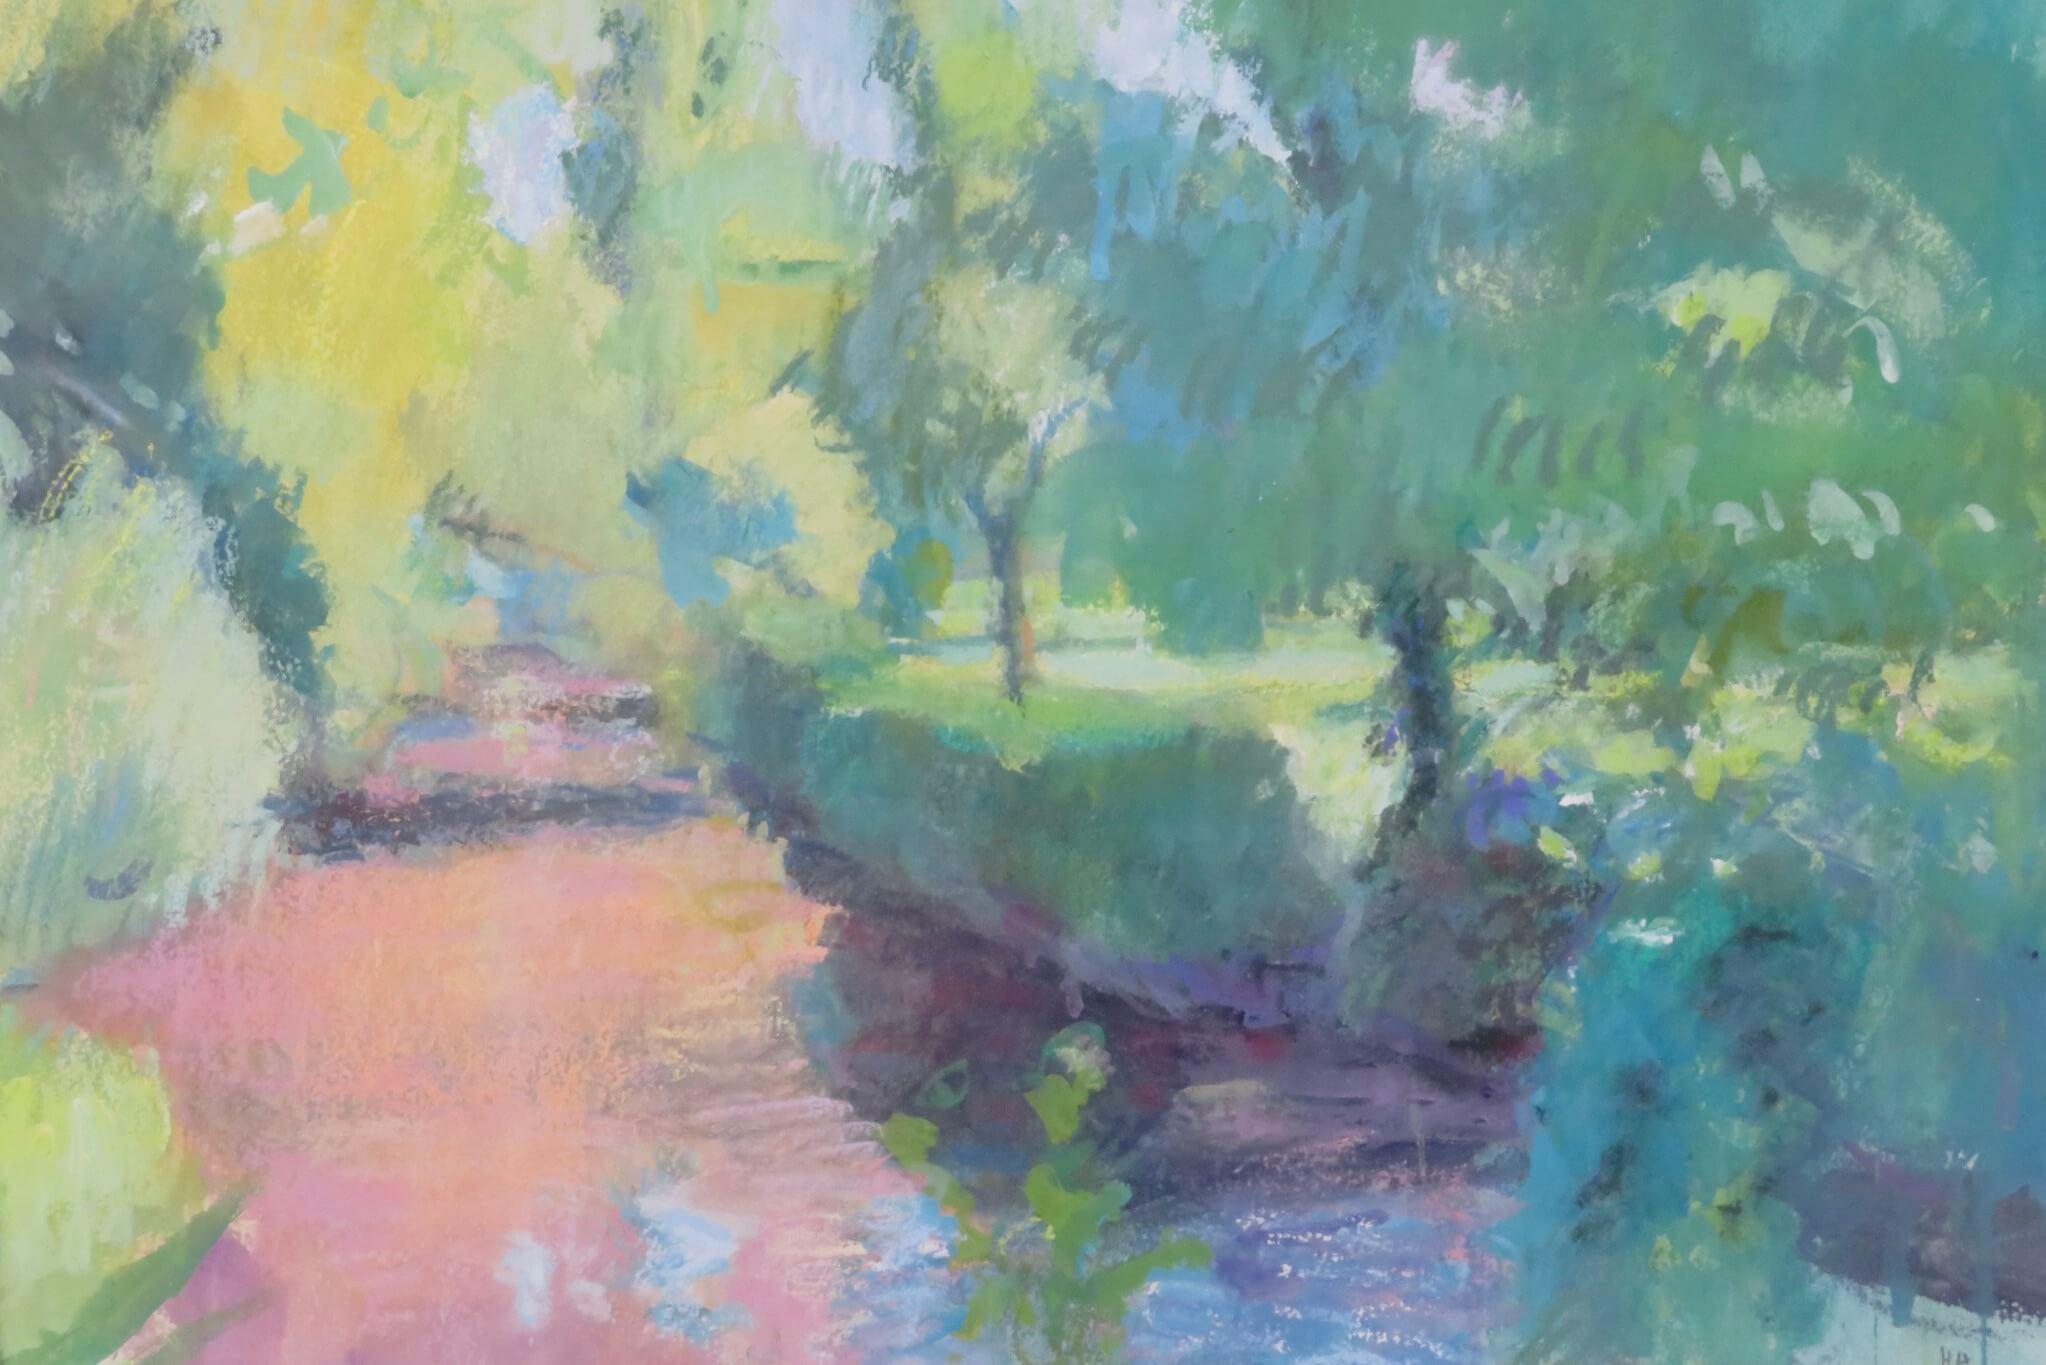 English Post Impressionist 20thC painting SUMMER RIVERBANK indistinctly signed - Post-Impressionist Painting by Unknown